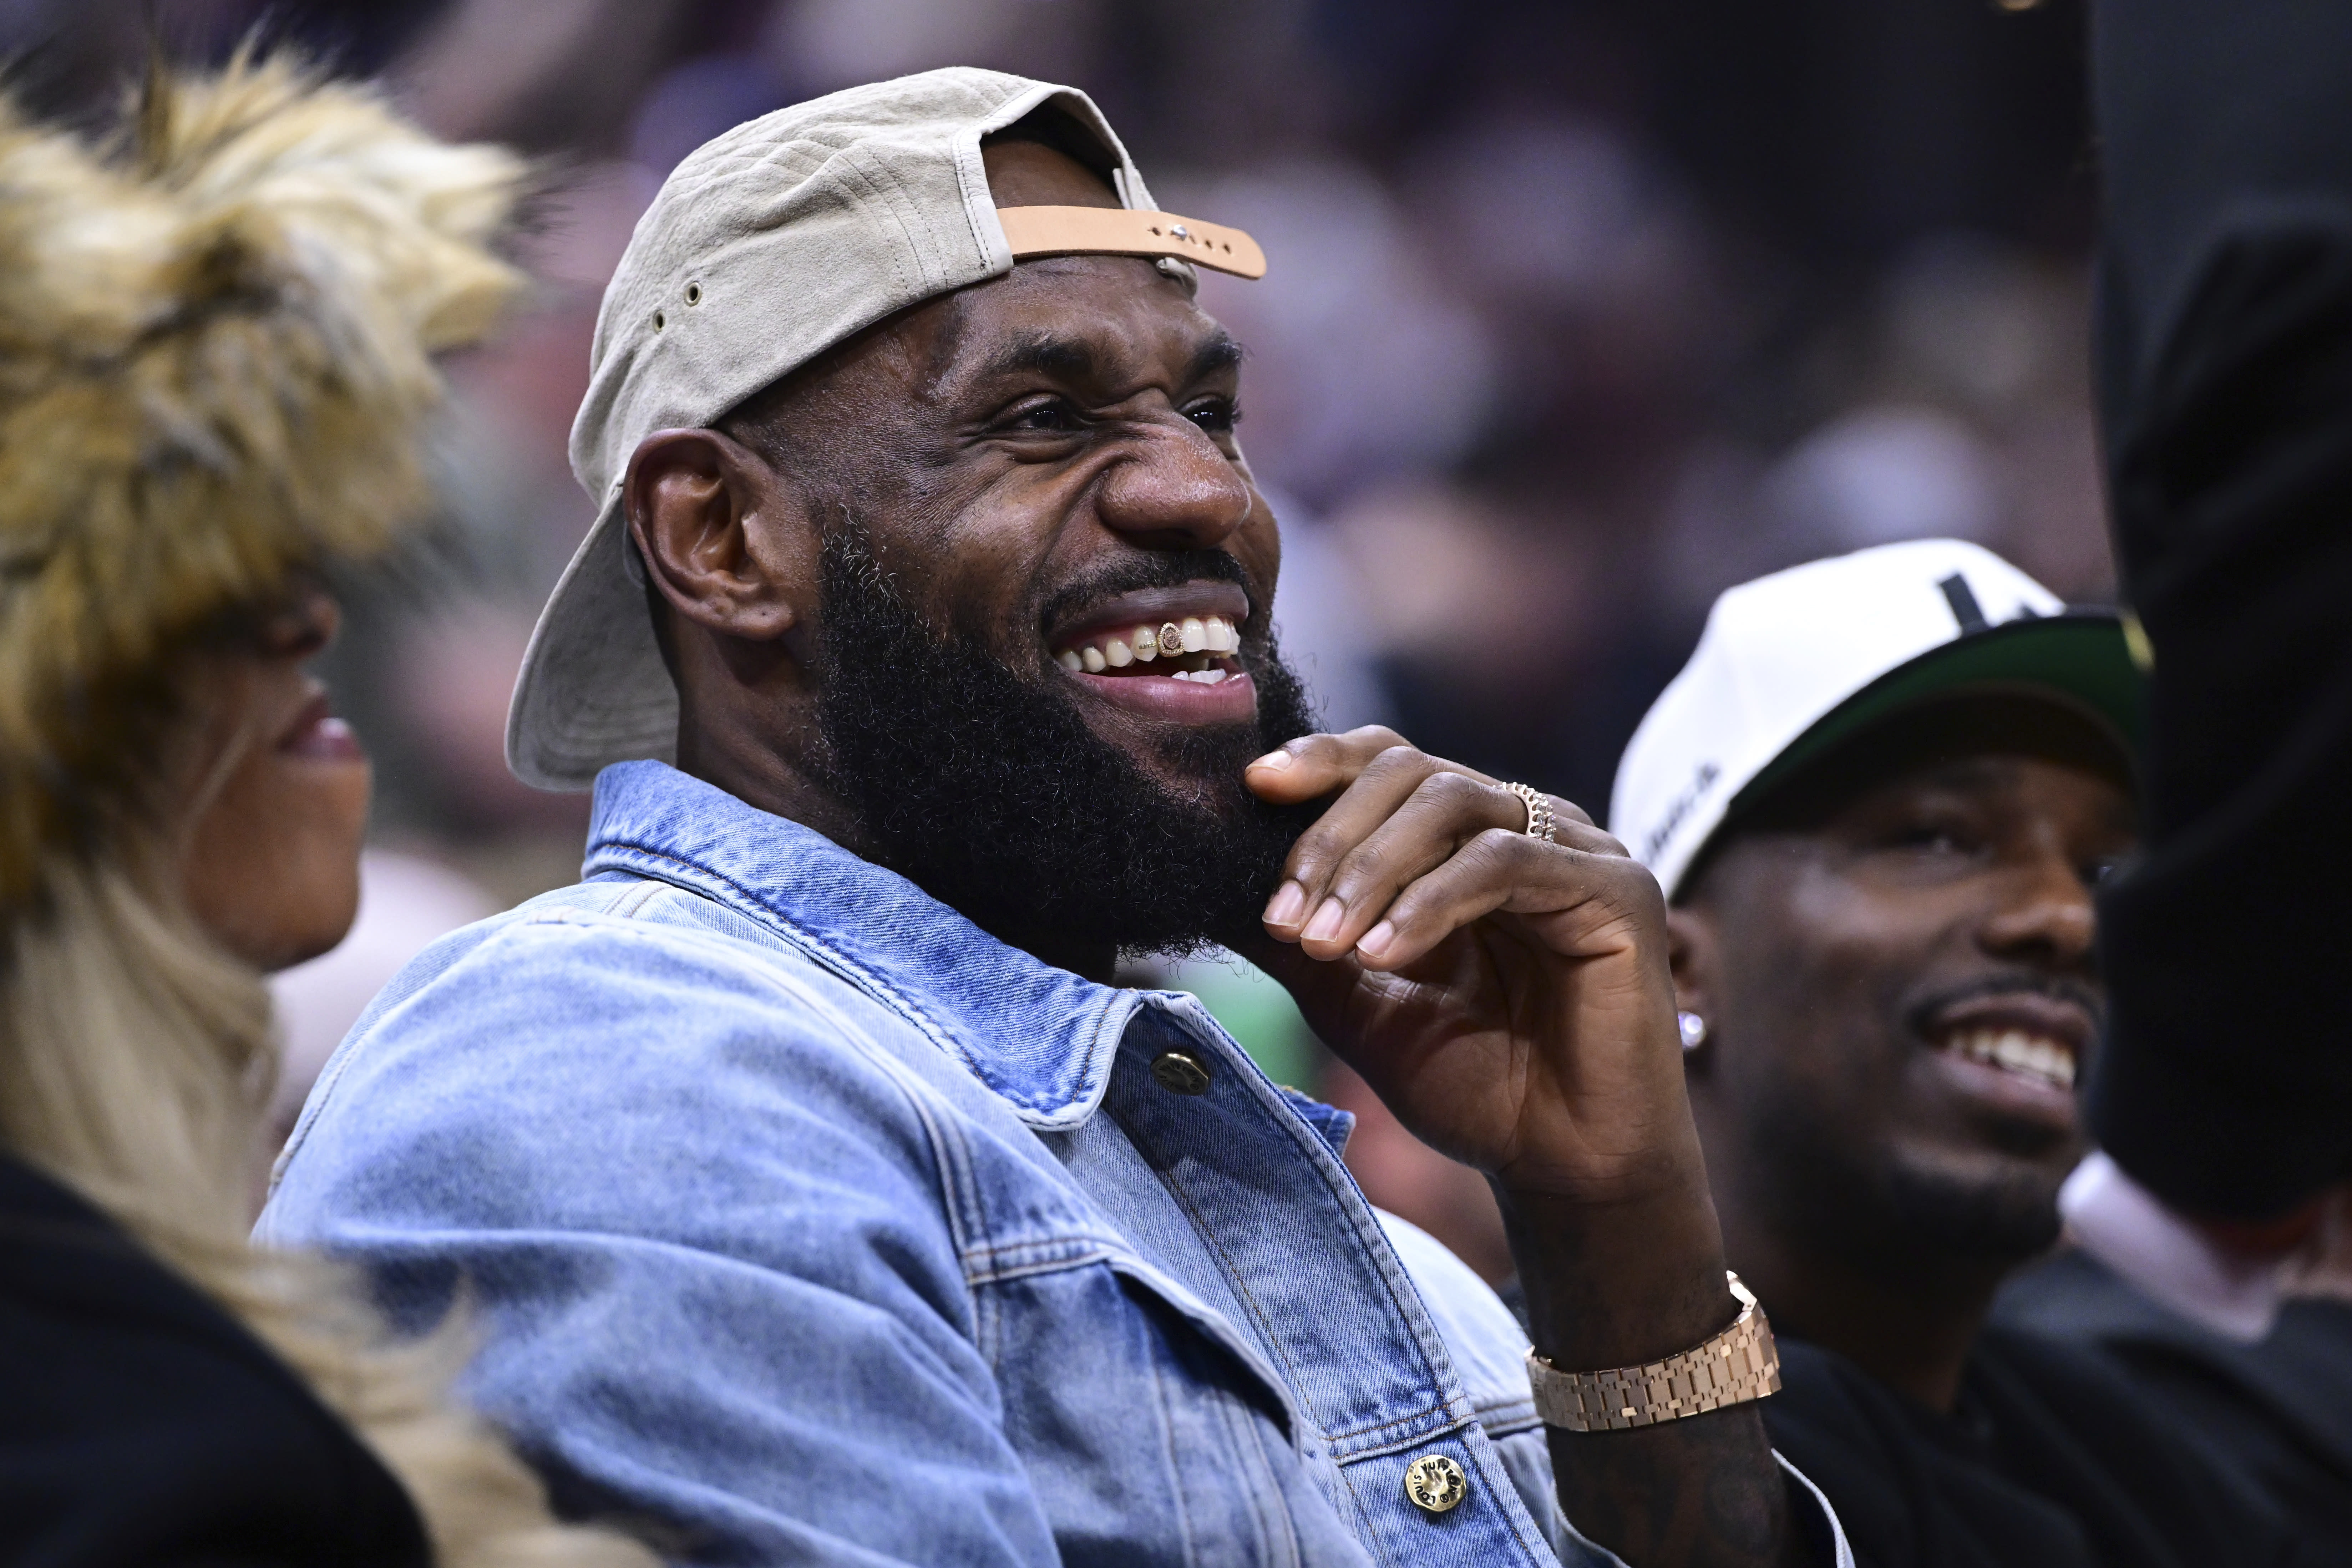 LeBron James greeted with rousing ovation from Cavaliers fans while sitting courtside for Celtics game